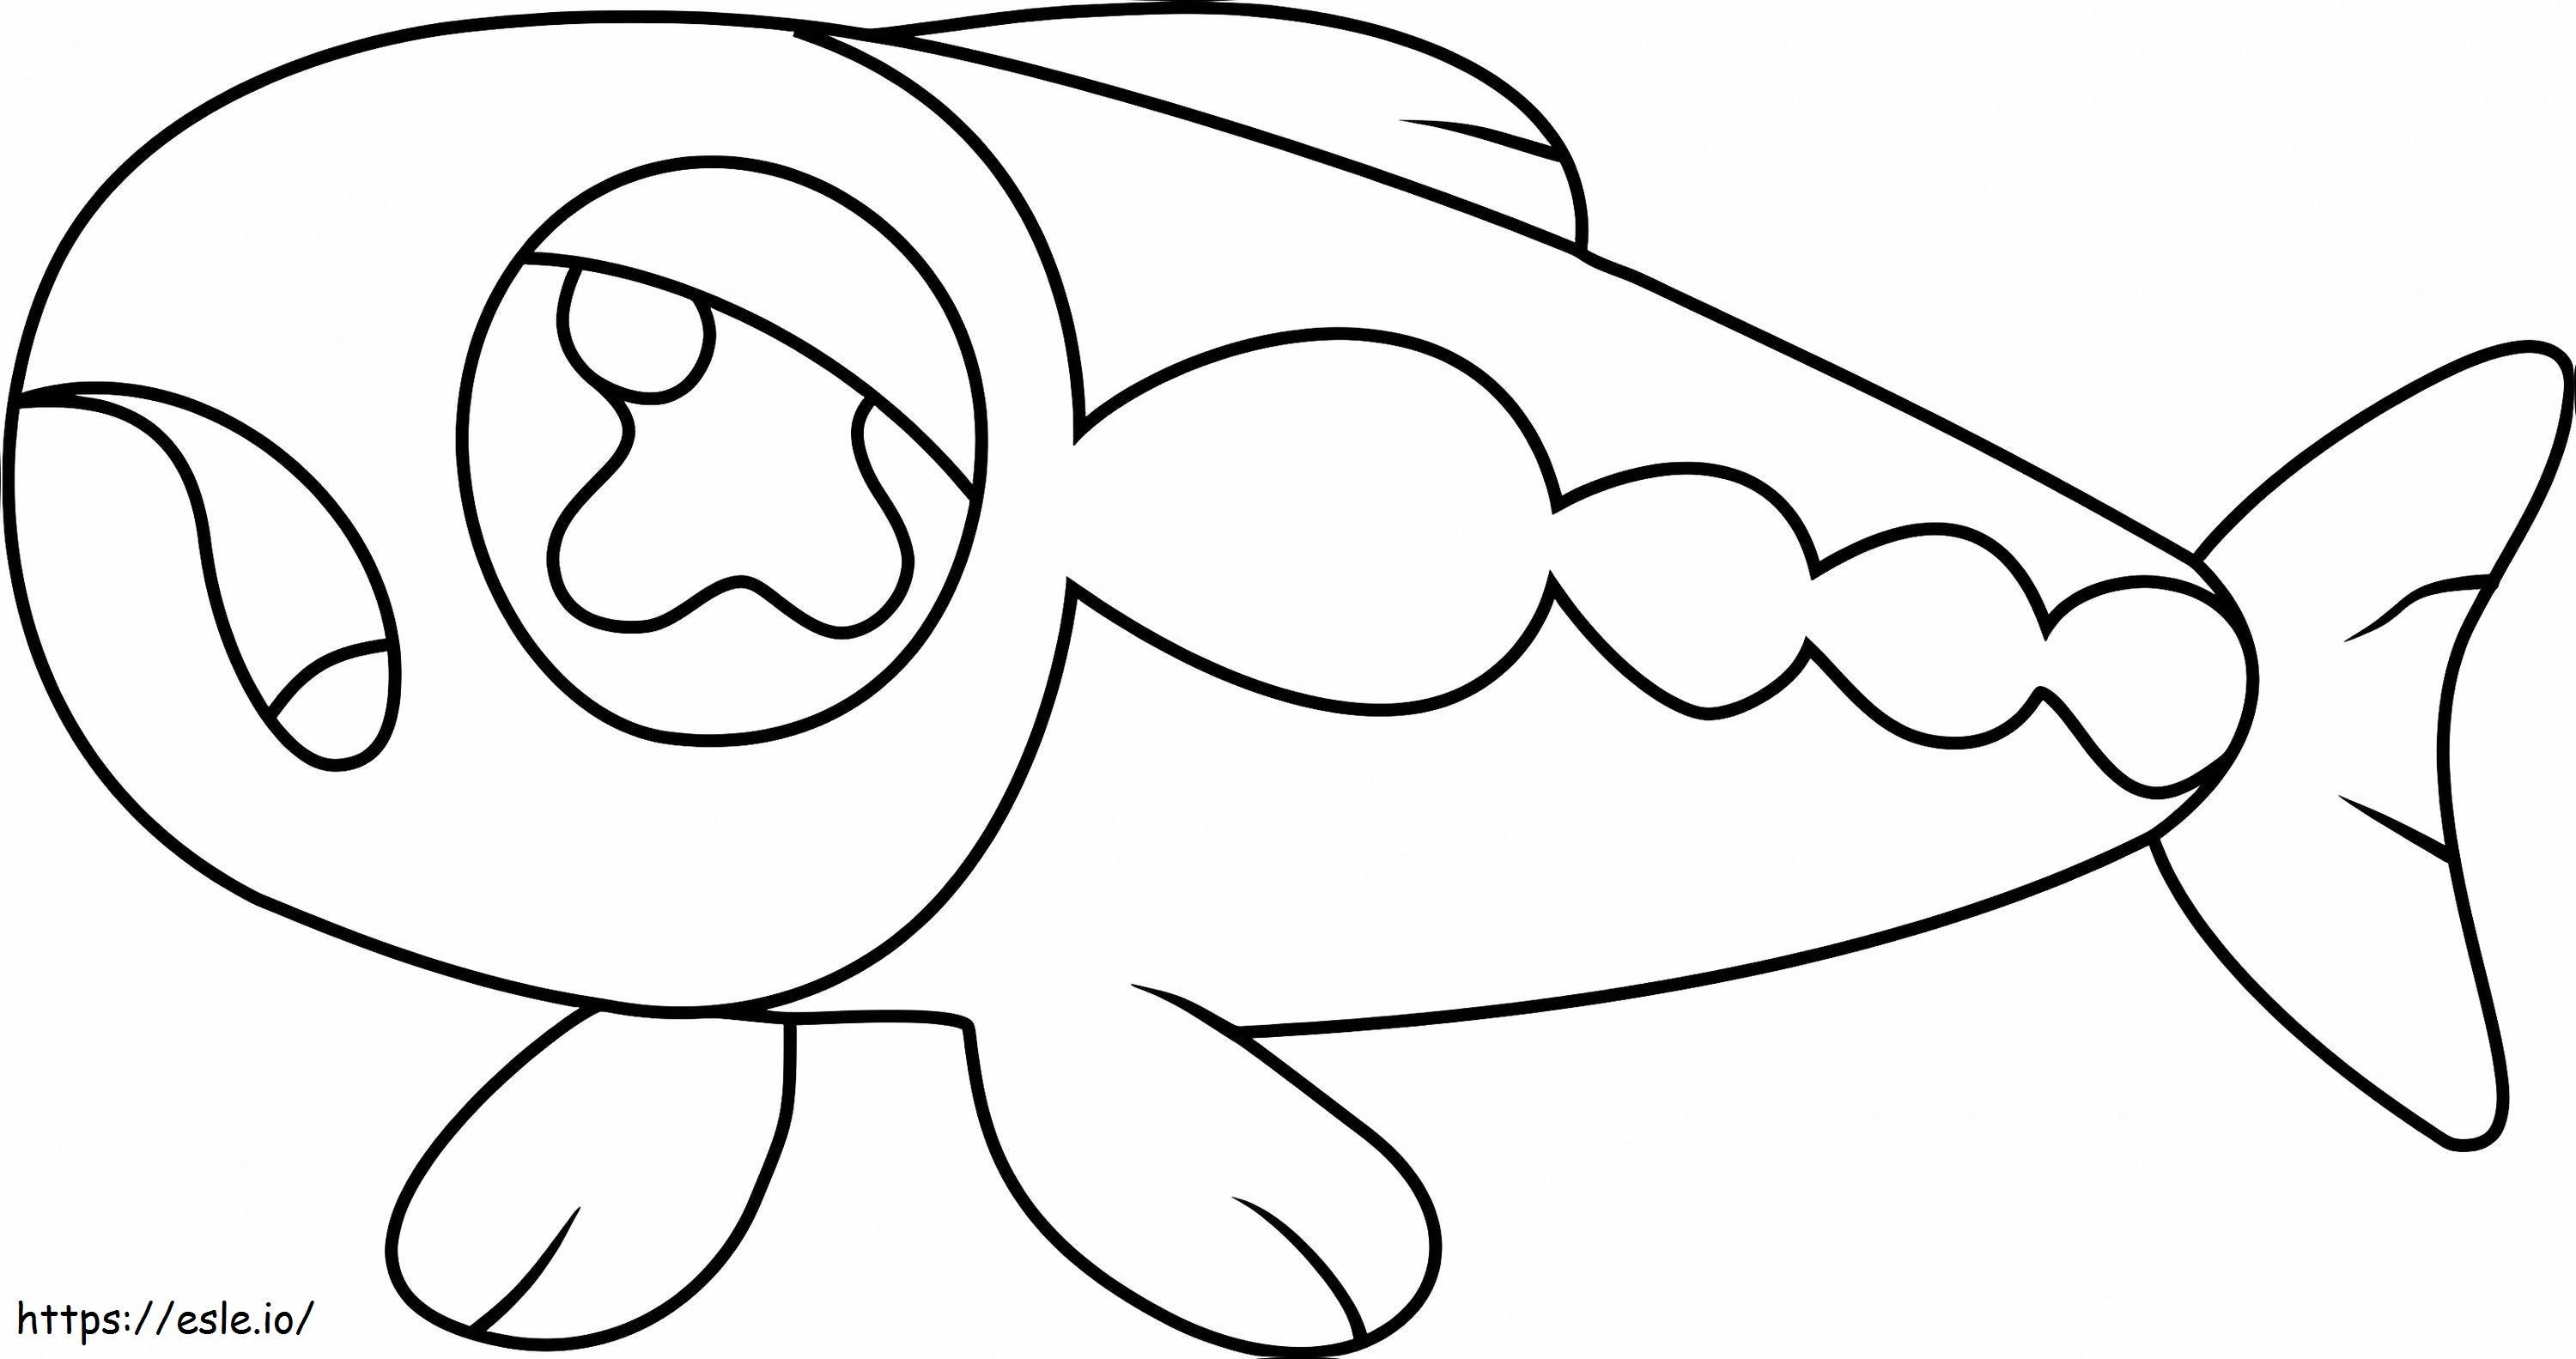 1529612378_12 coloring page